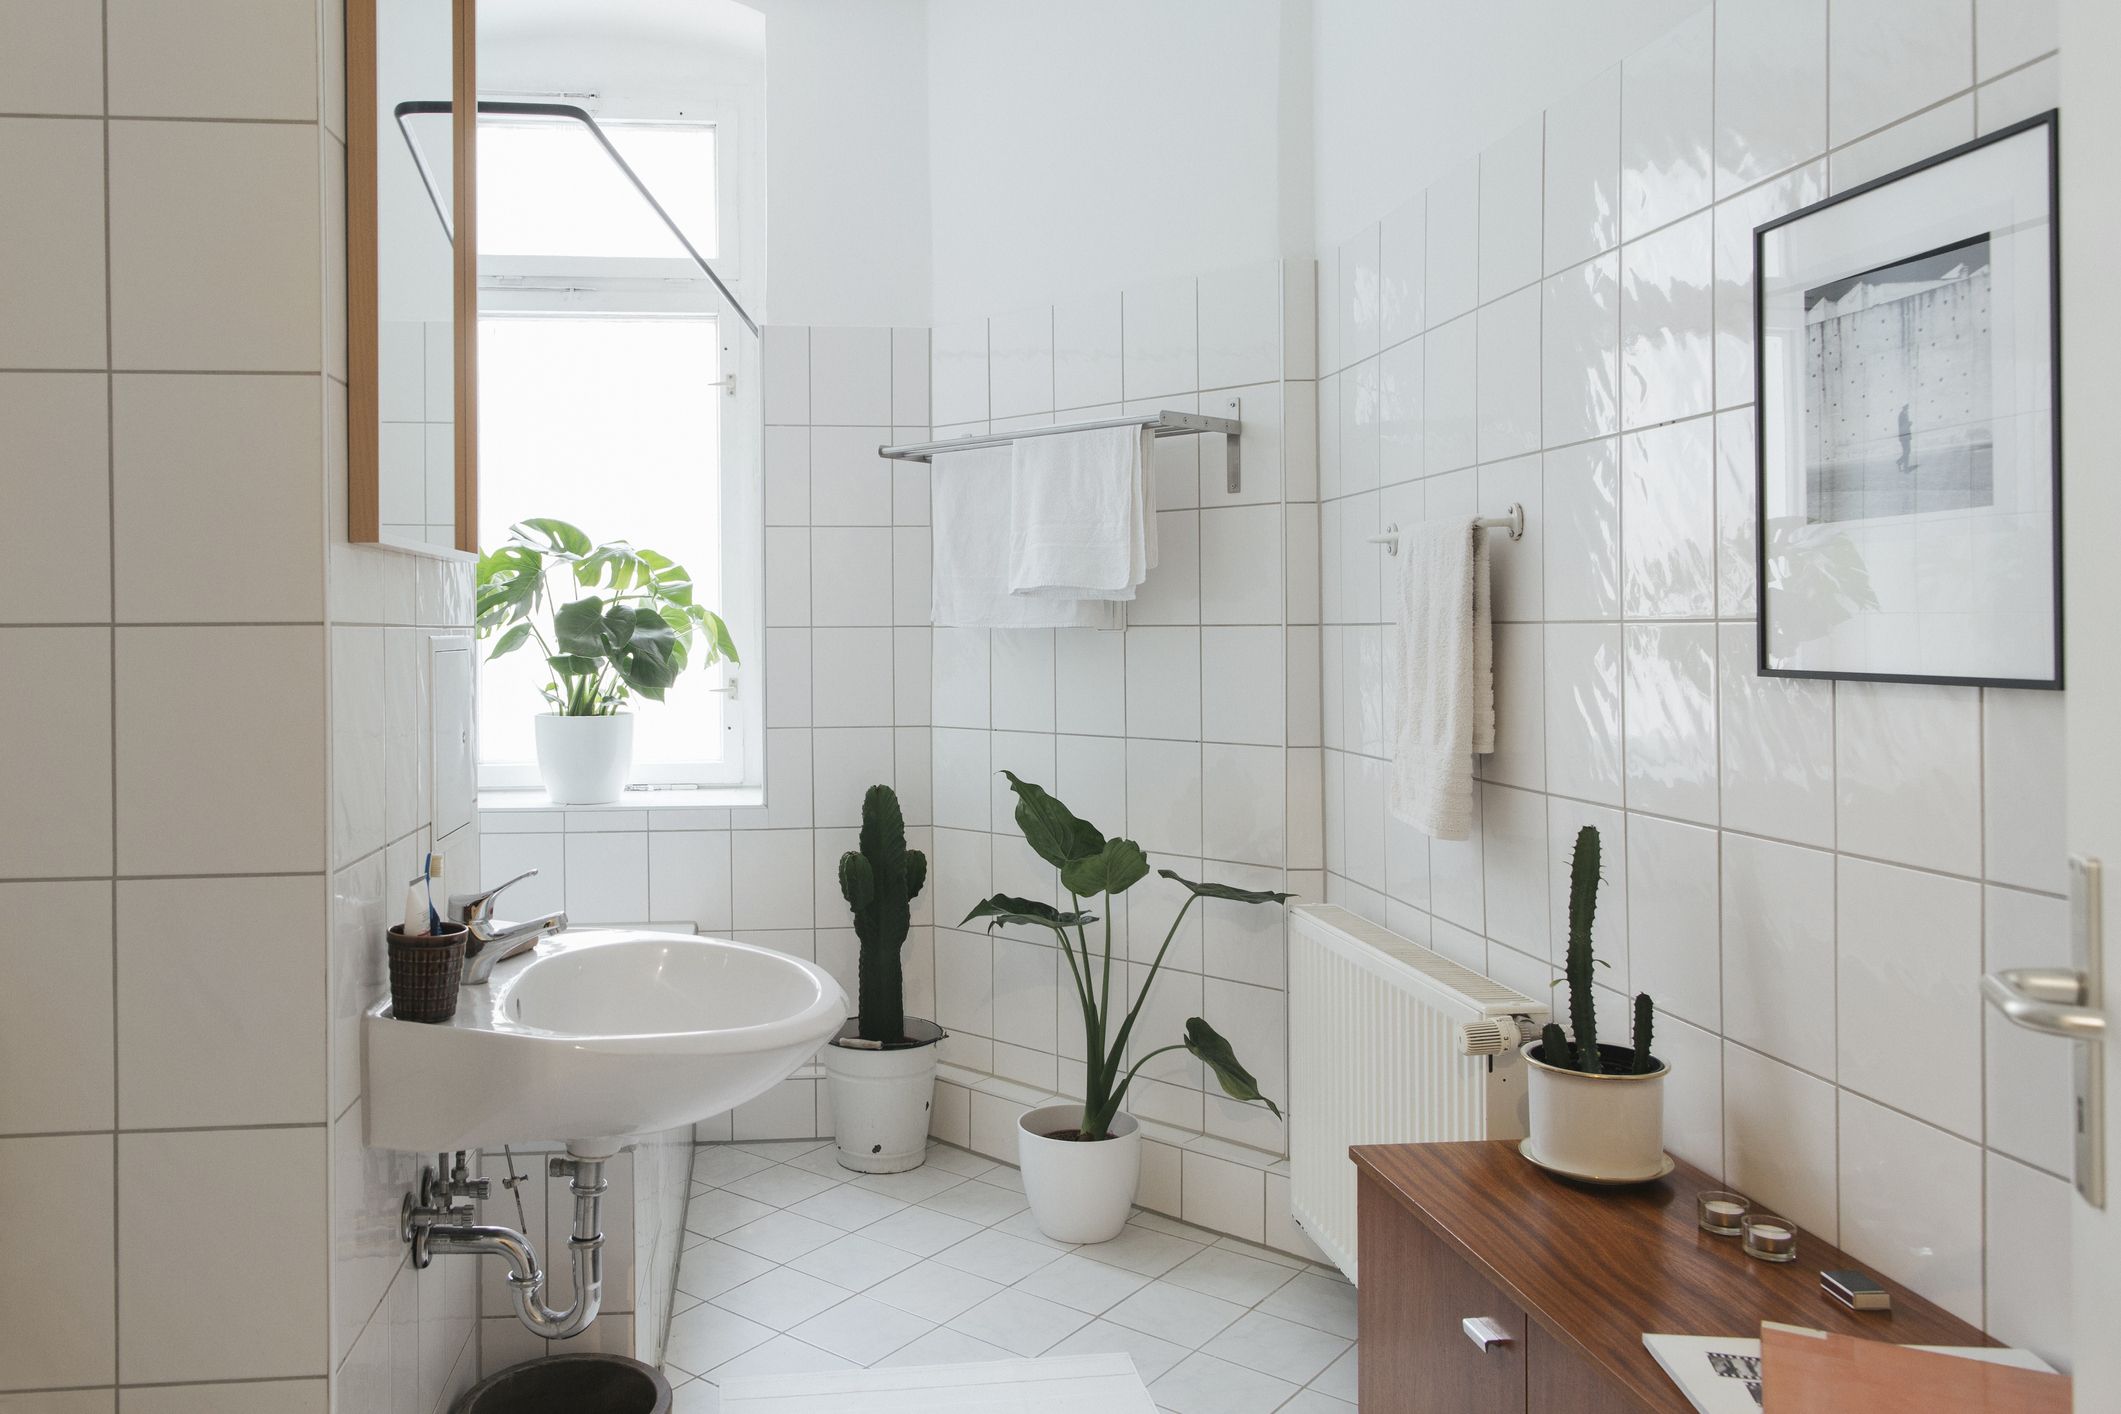 Use These Shower Cleaning Hacks to Clean Your Bathroom Faster